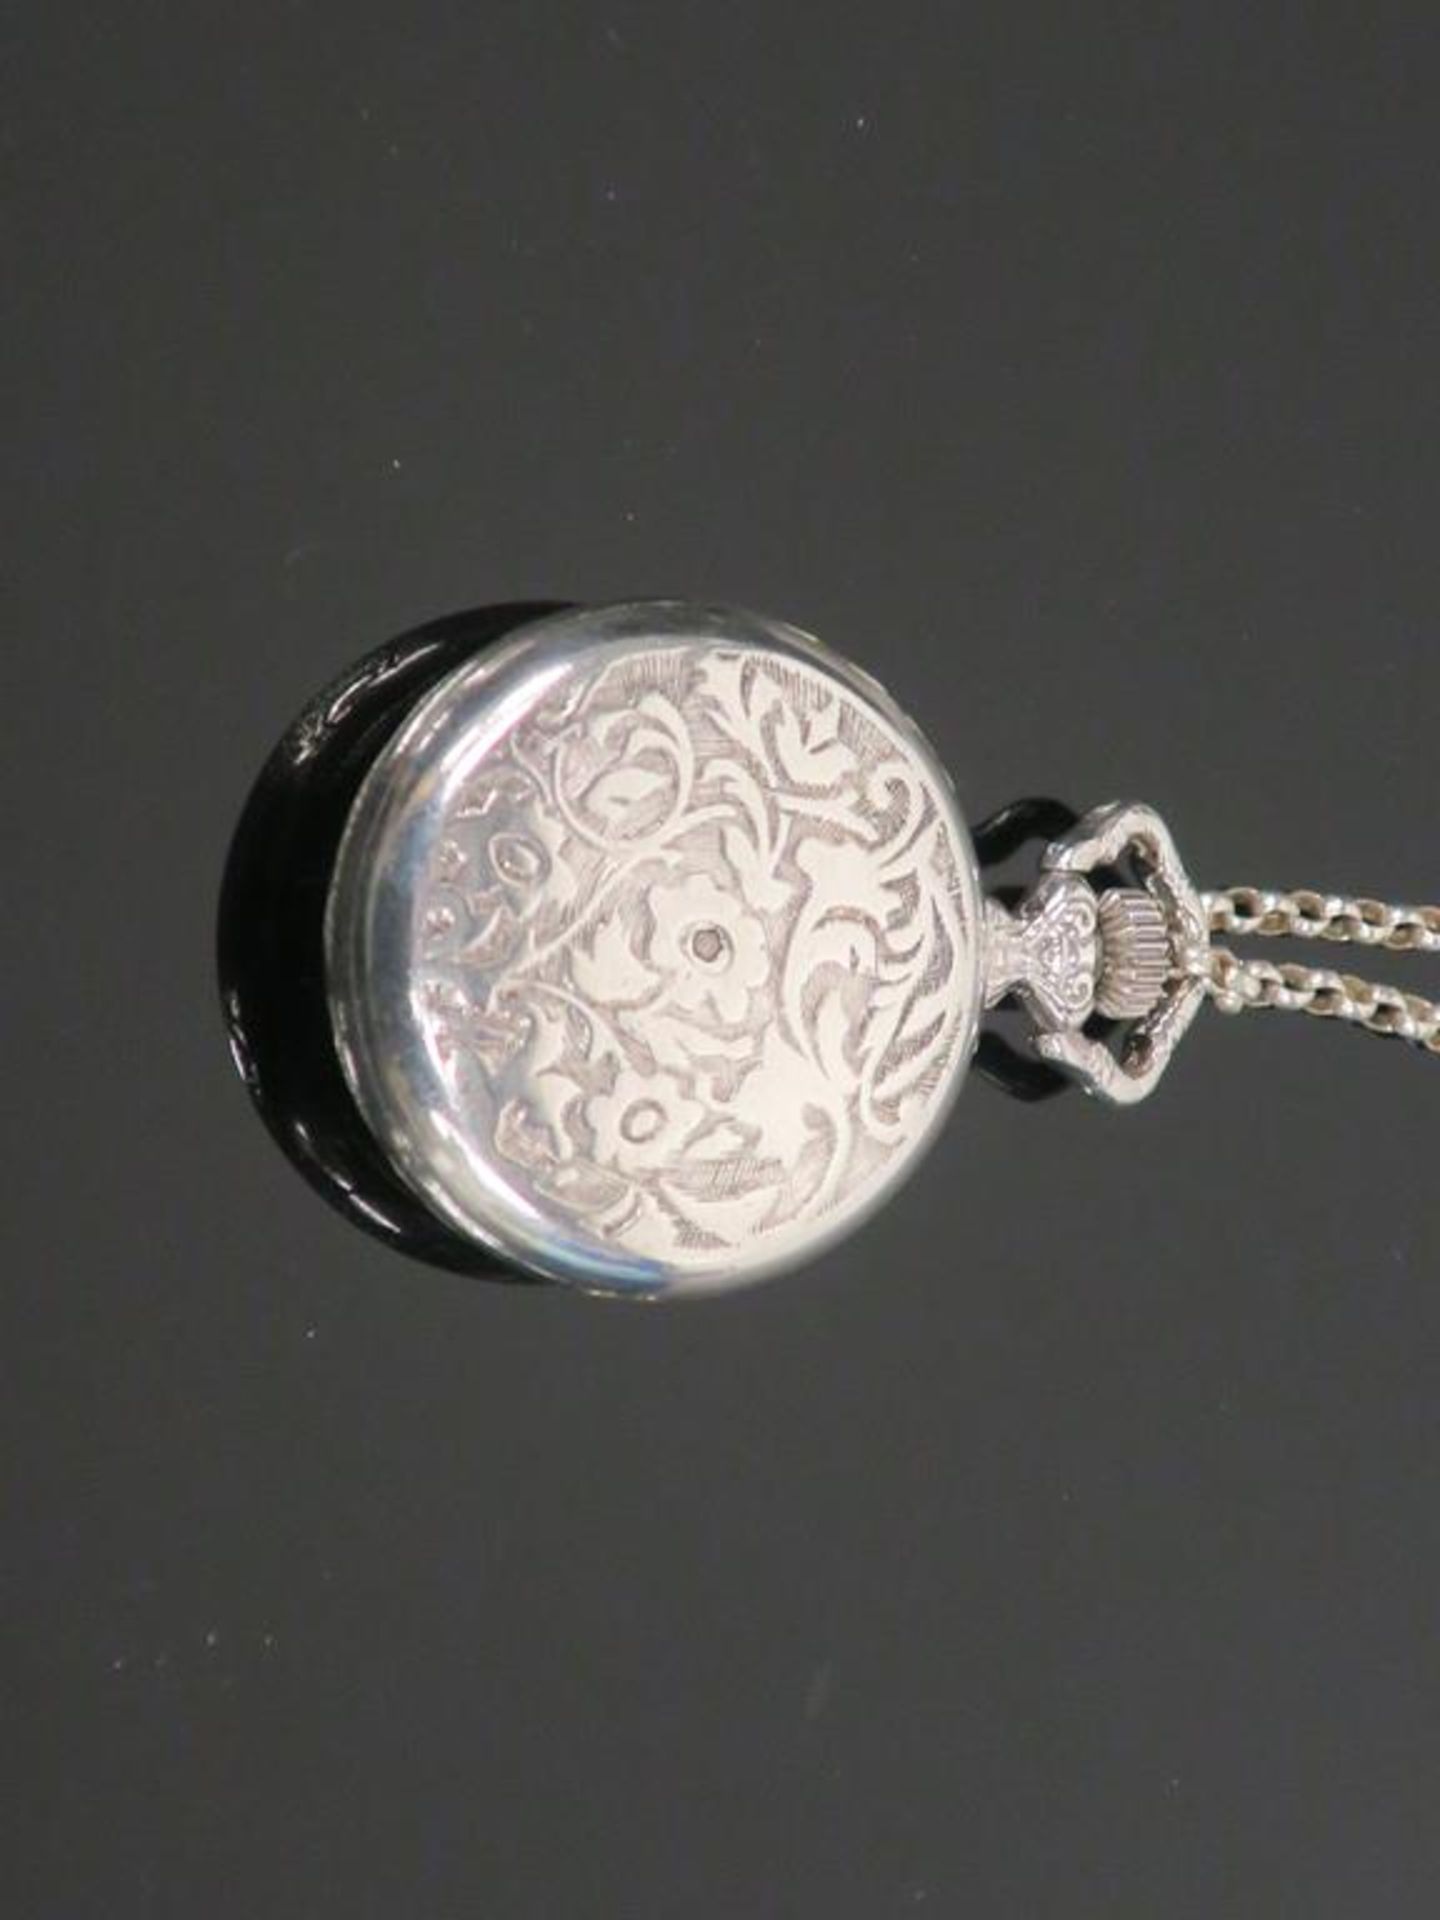 A Vintage, Silver Fob Watch and Chain (est £40-£80) - Image 3 of 3